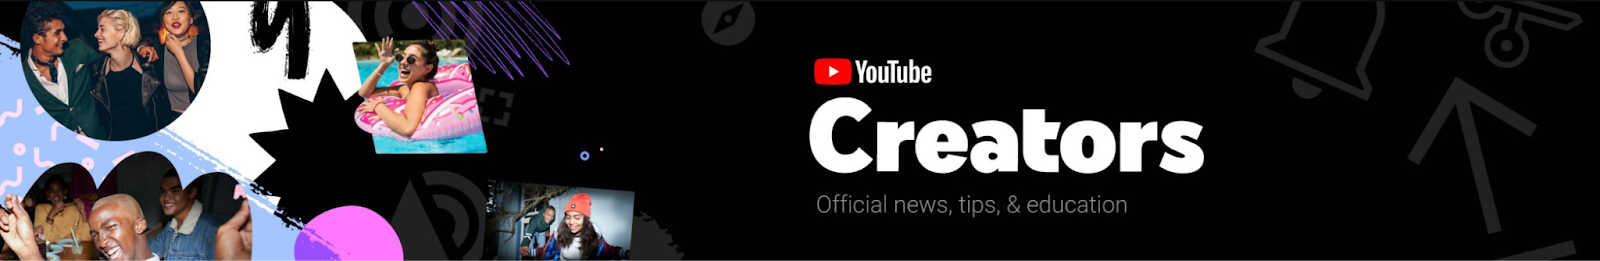 The YouTube Creators channel banner.